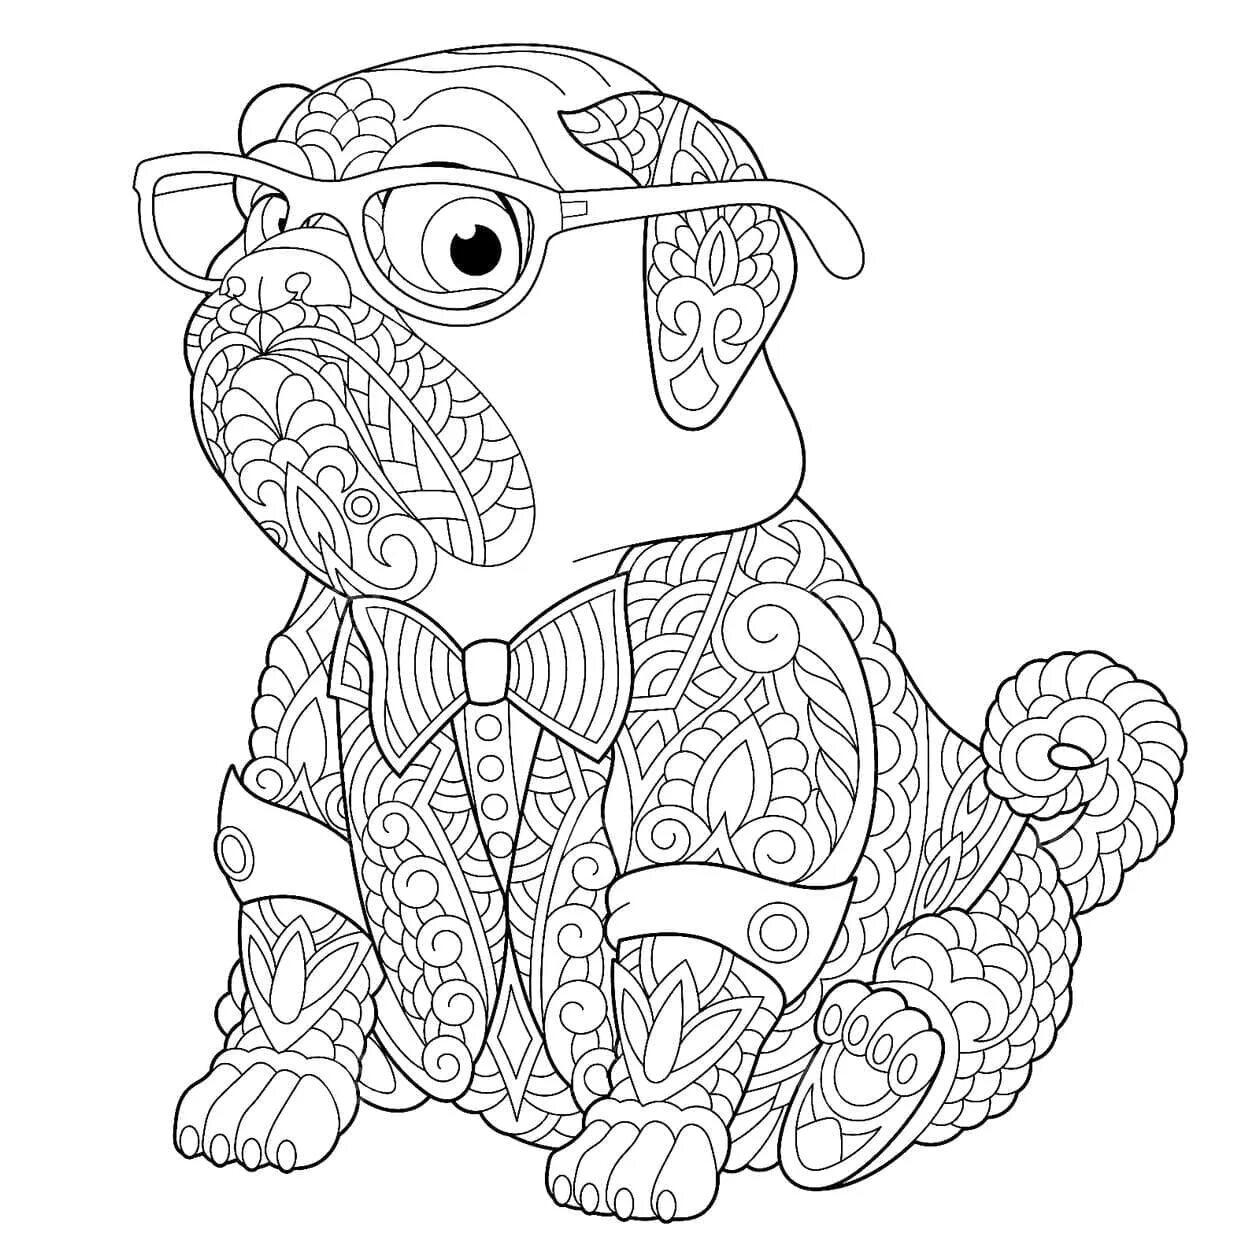 Spicy coloring anti-stress pug